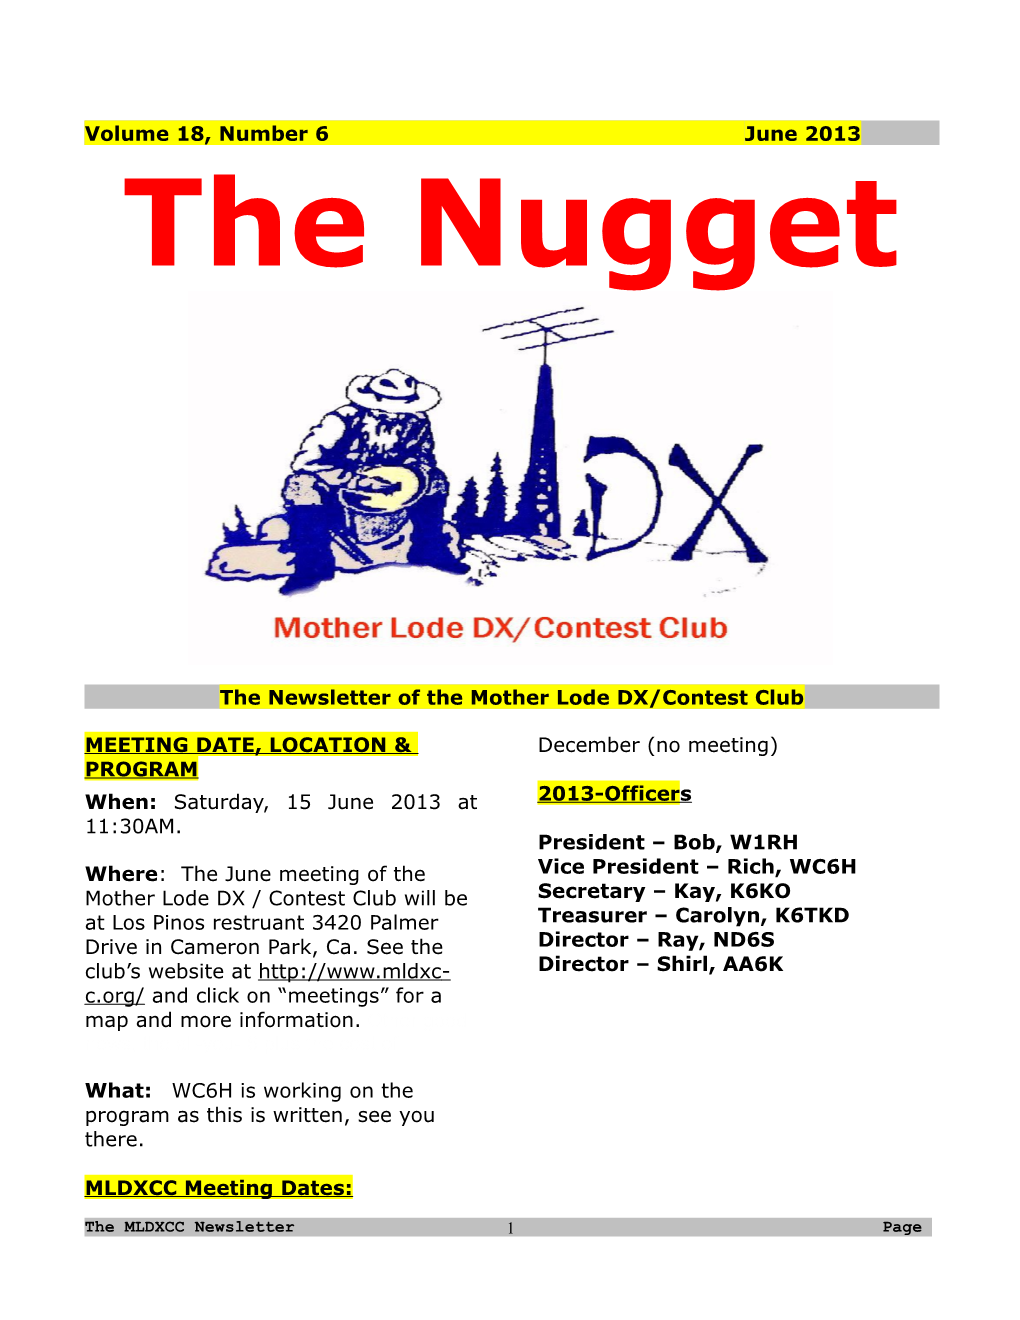 The Newsletter of the Mother Lode DX/Contest Club